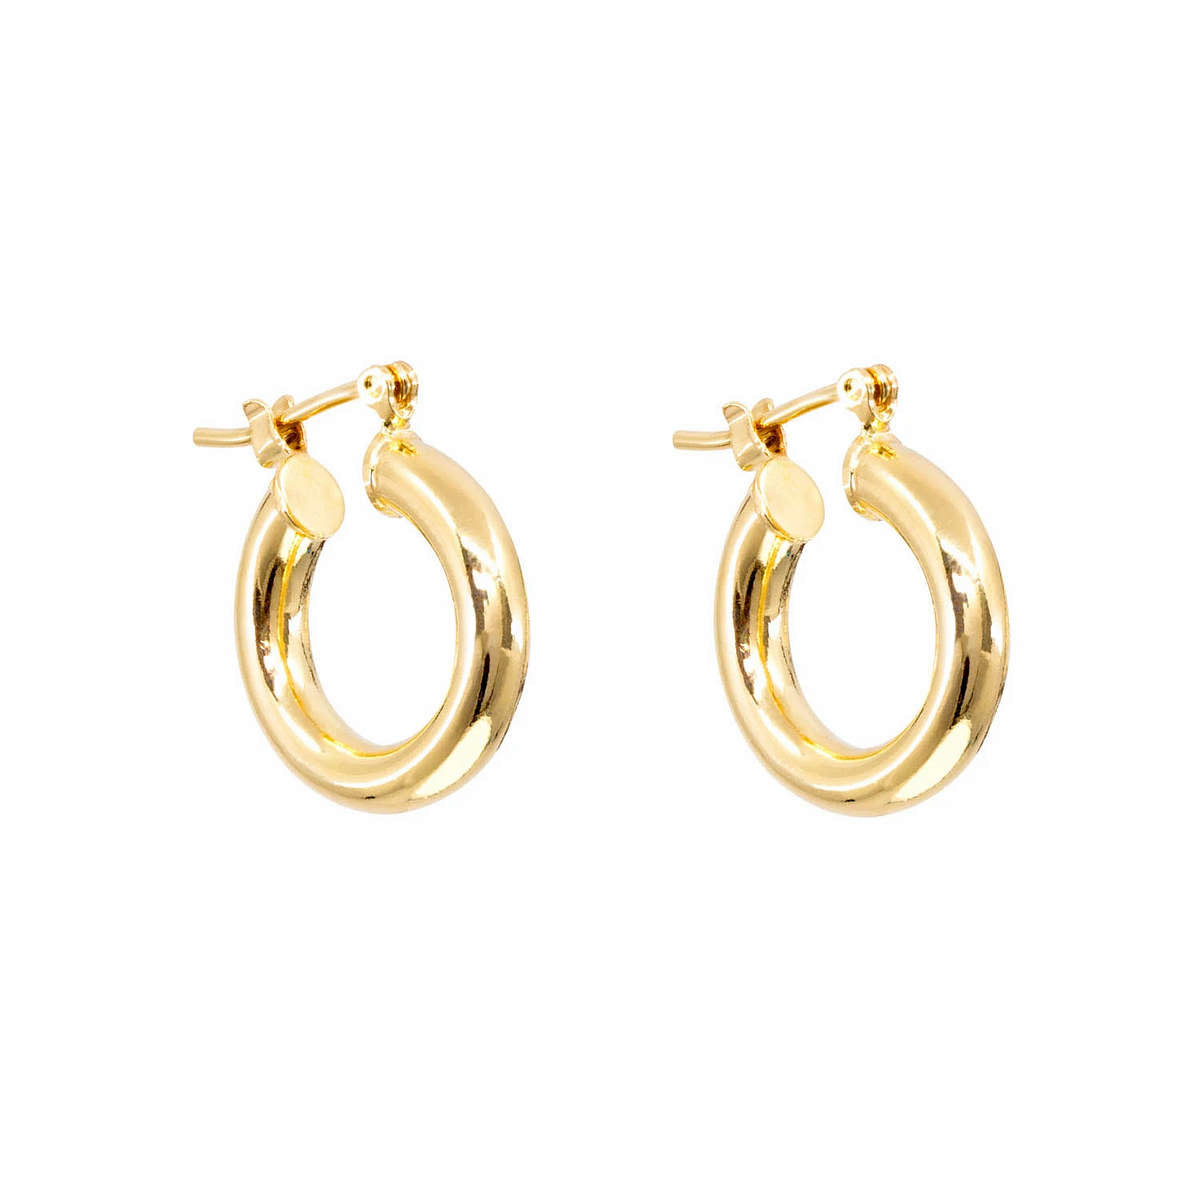 Show Your Halo Hollow Hoops in Small